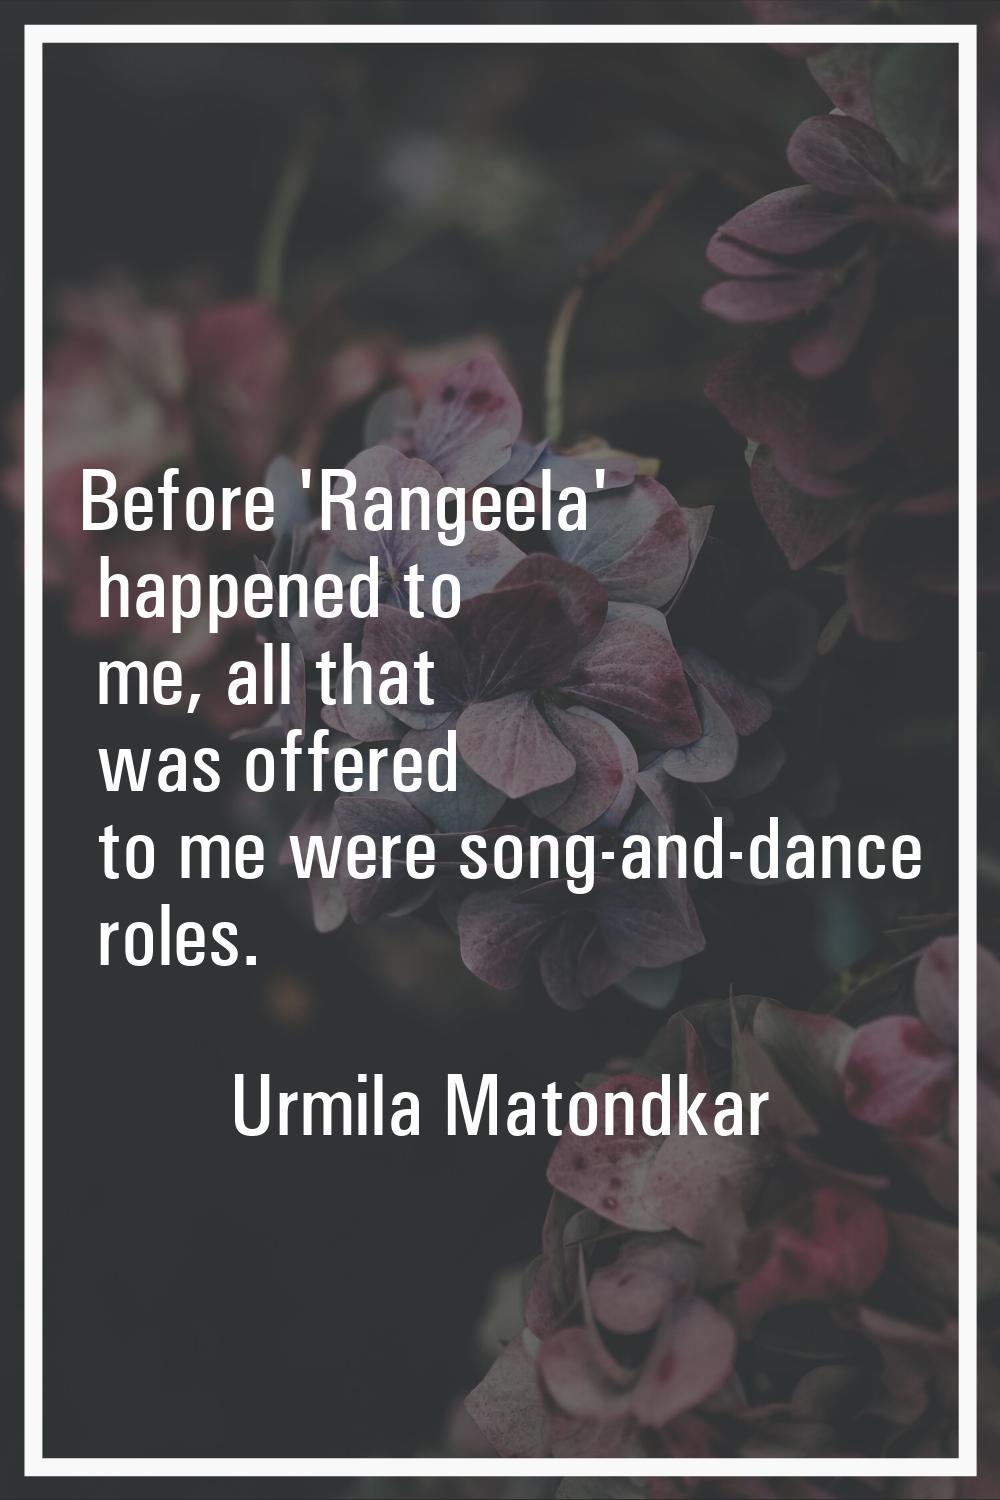 Before 'Rangeela' happened to me, all that was offered to me were song-and-dance roles.